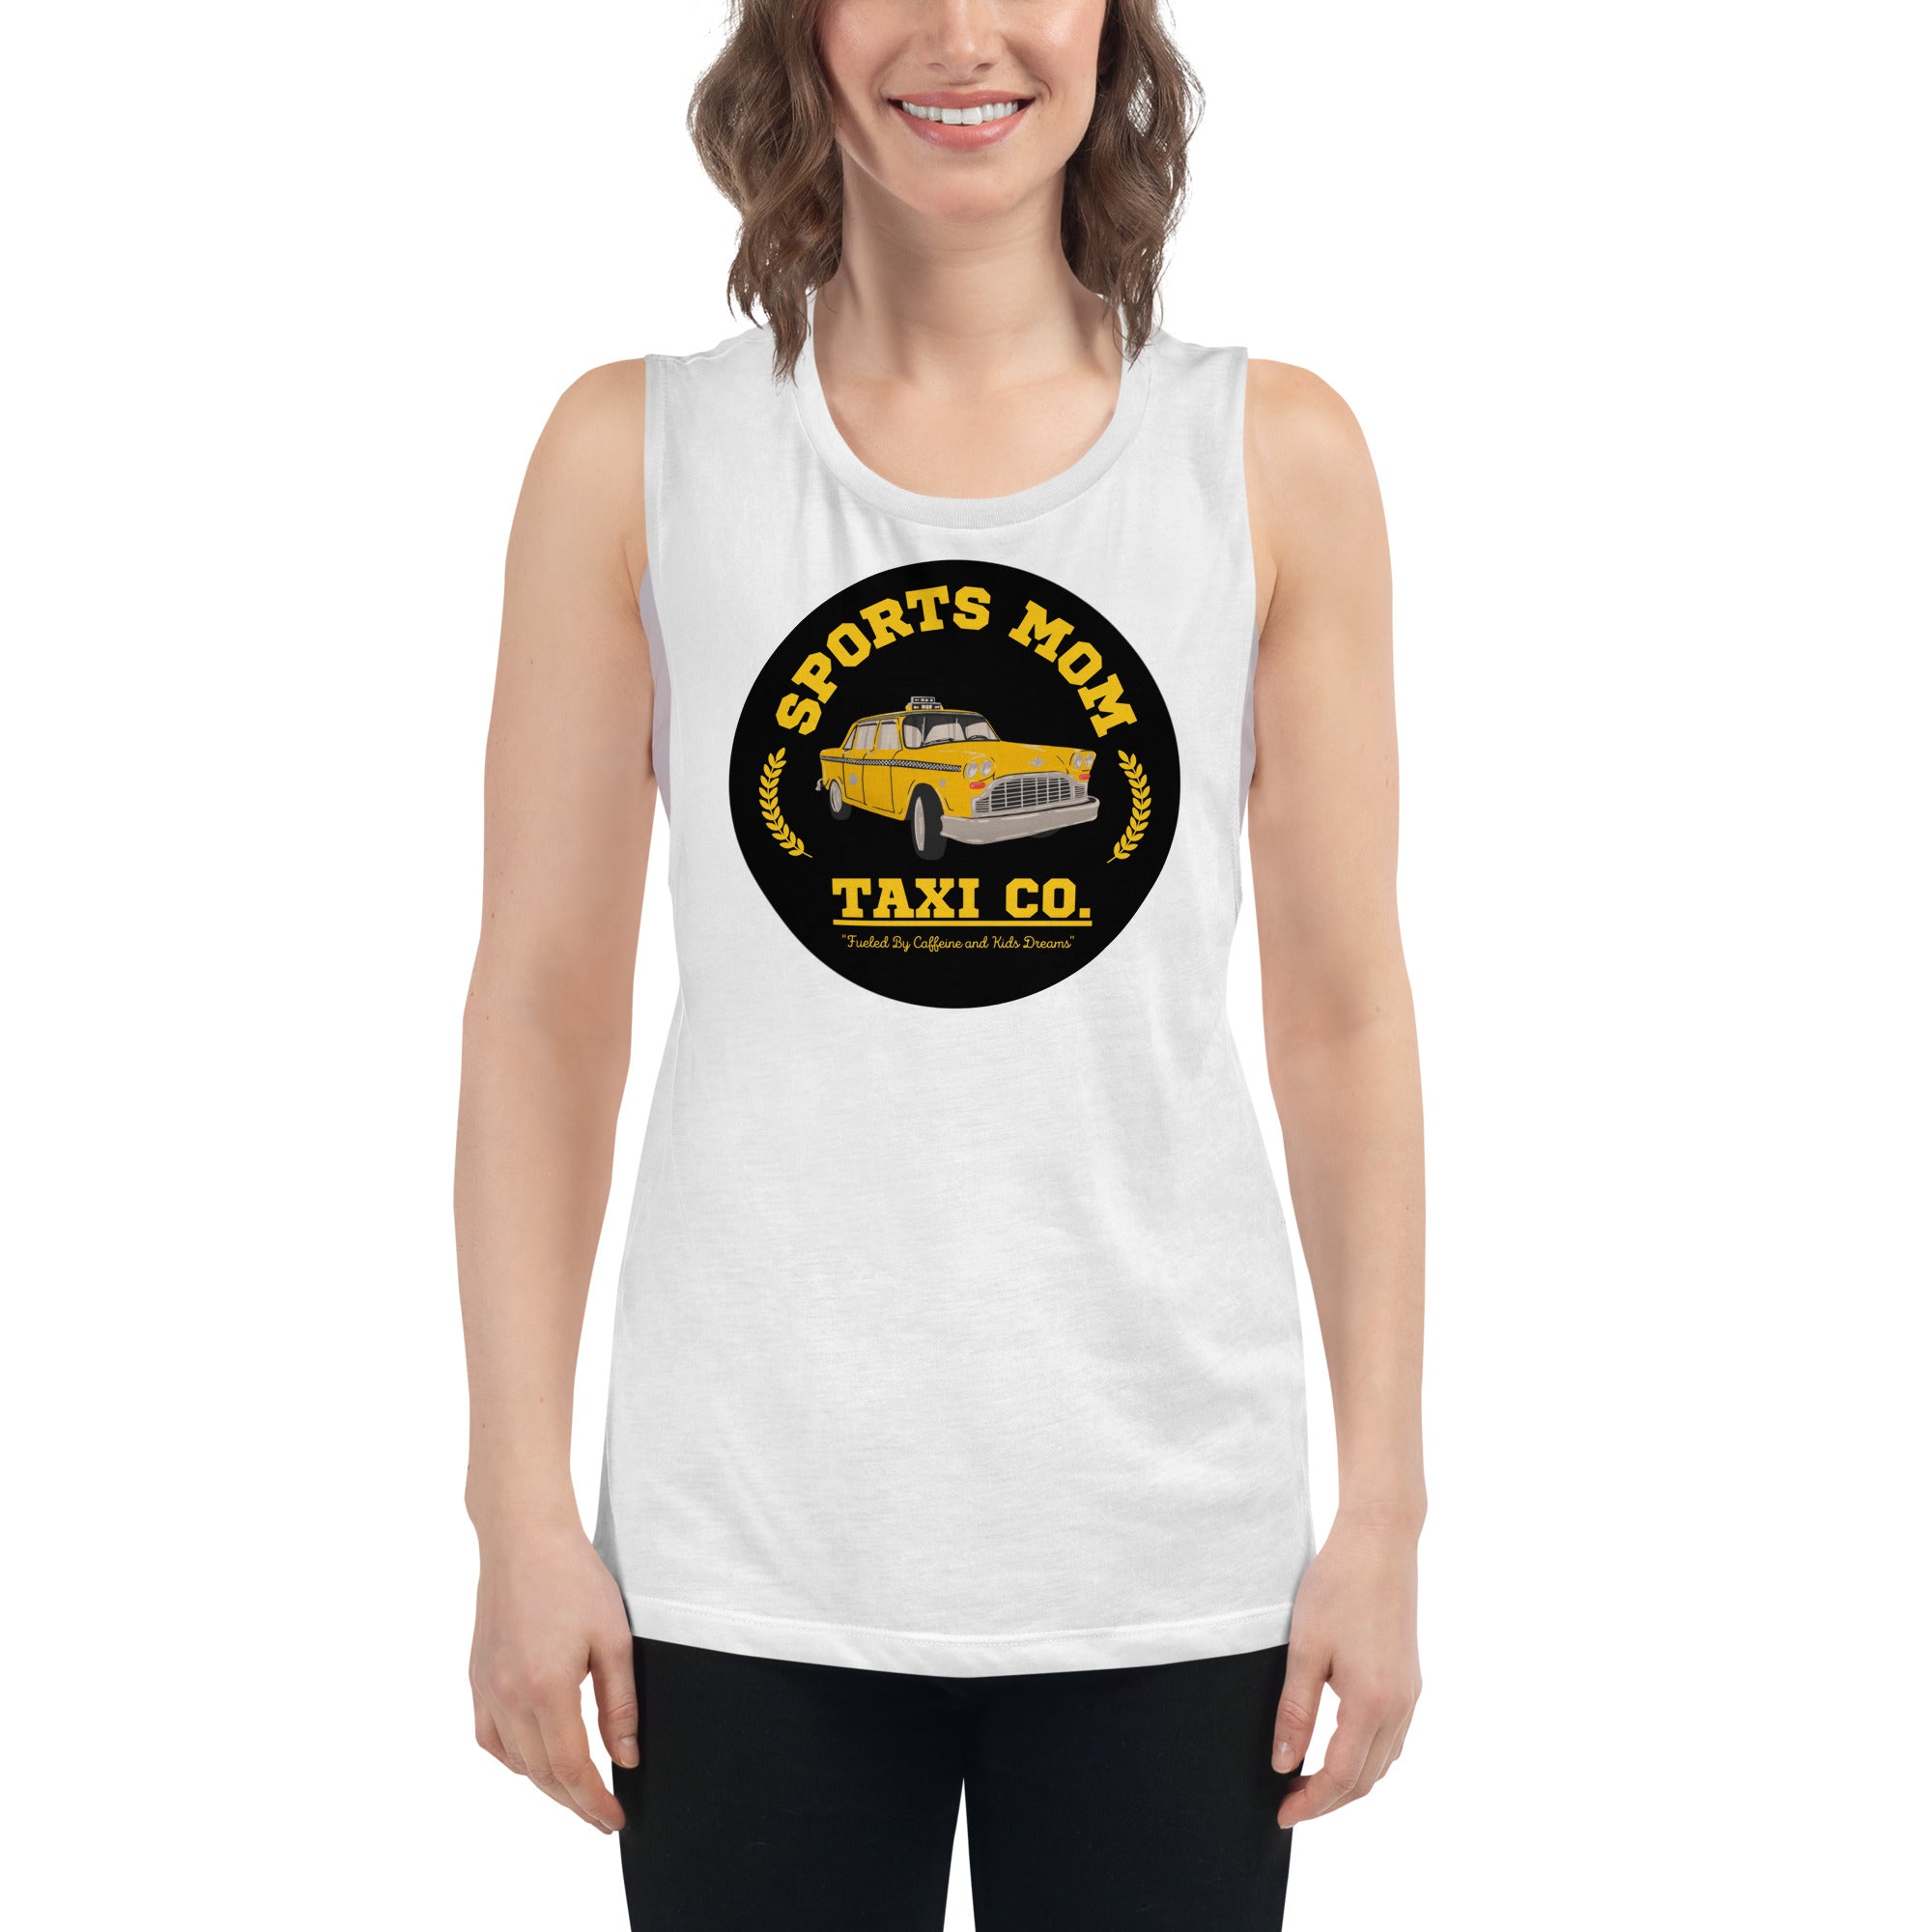 The Sports Mom Taxi Co. Original Muscle Tank